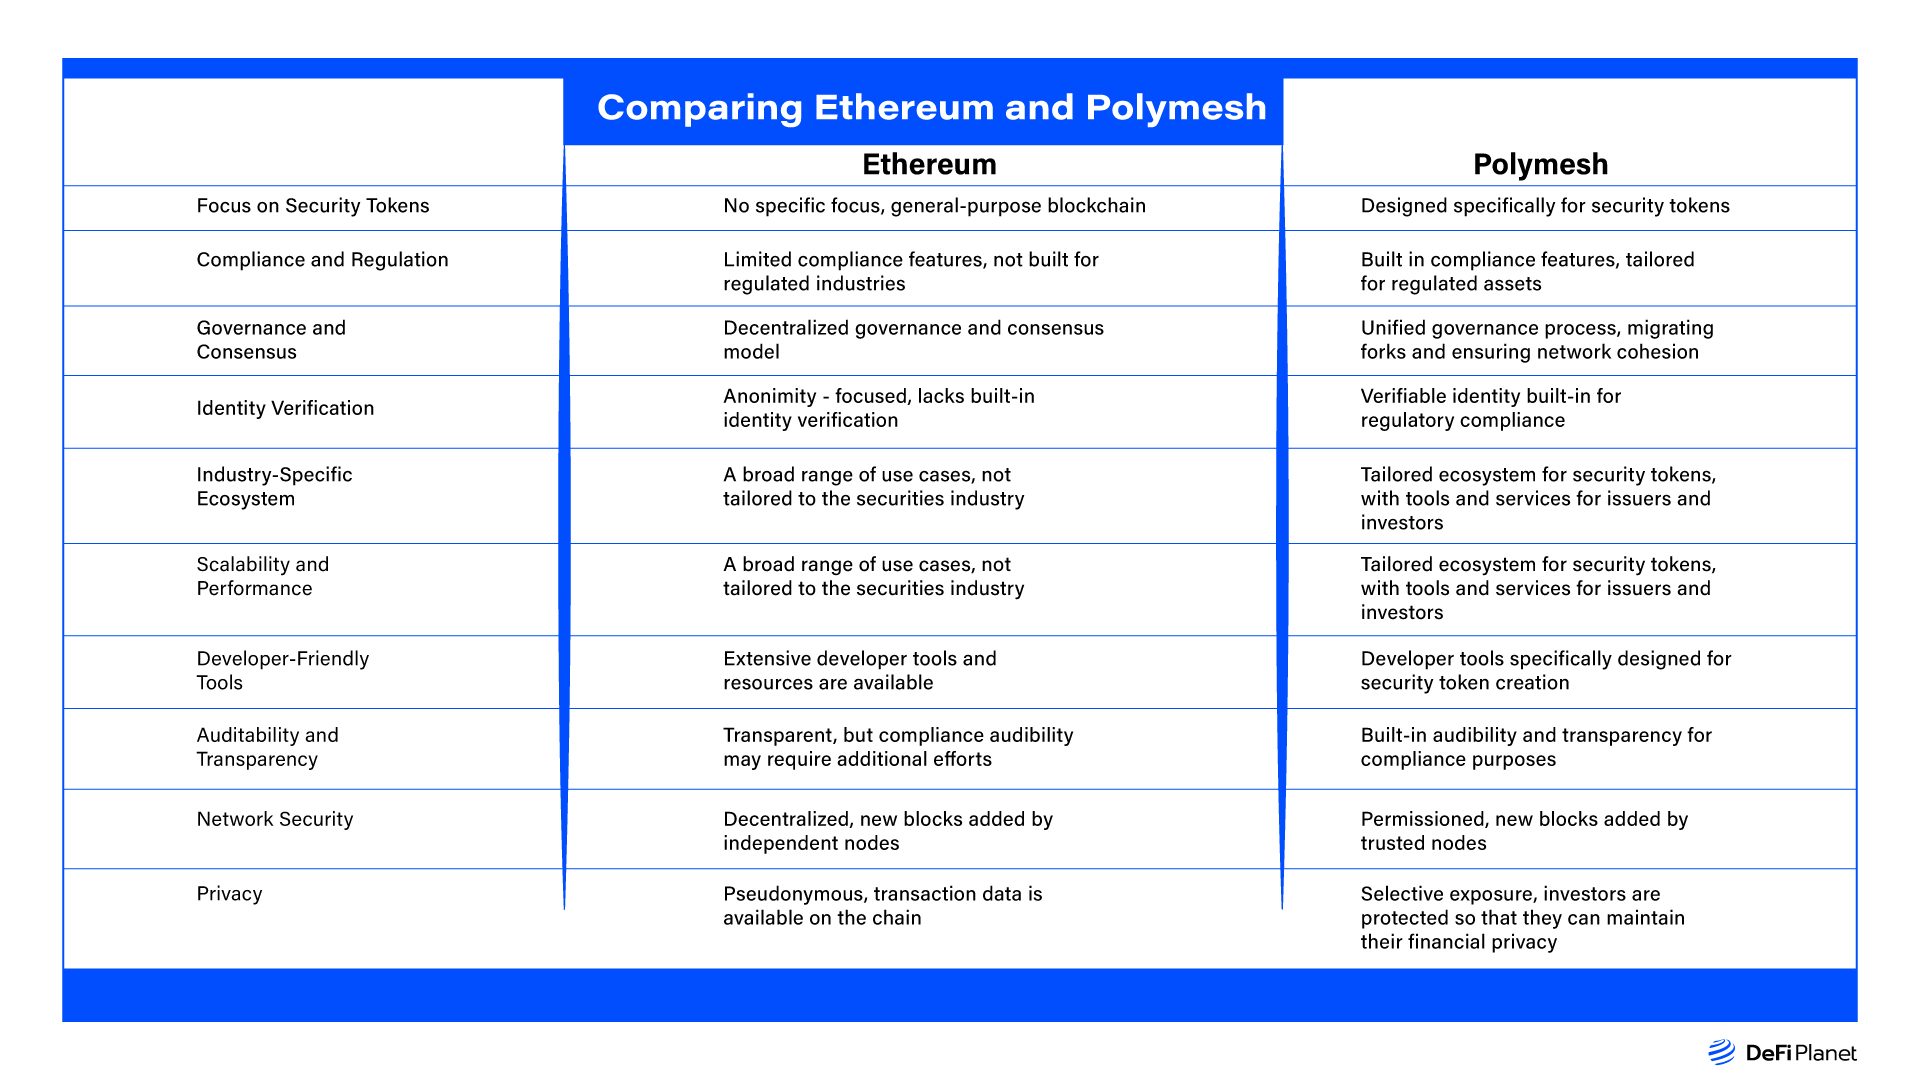 Comparing-Ethereum-And-Polymesh on DeFi Planet